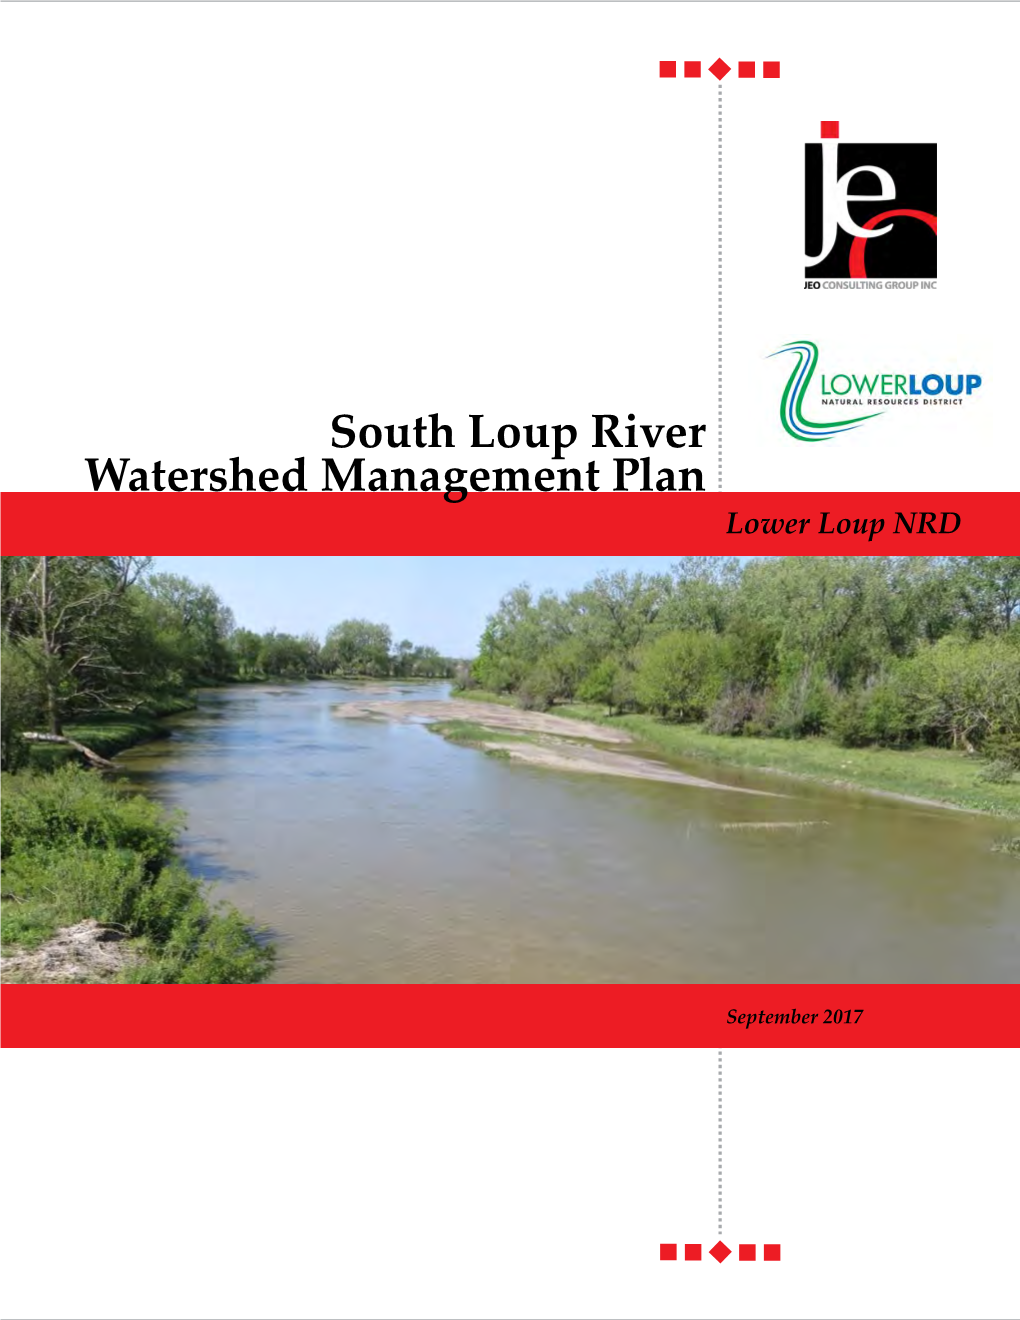 South Loup River Watershed Management Plan Lower Loup NRD